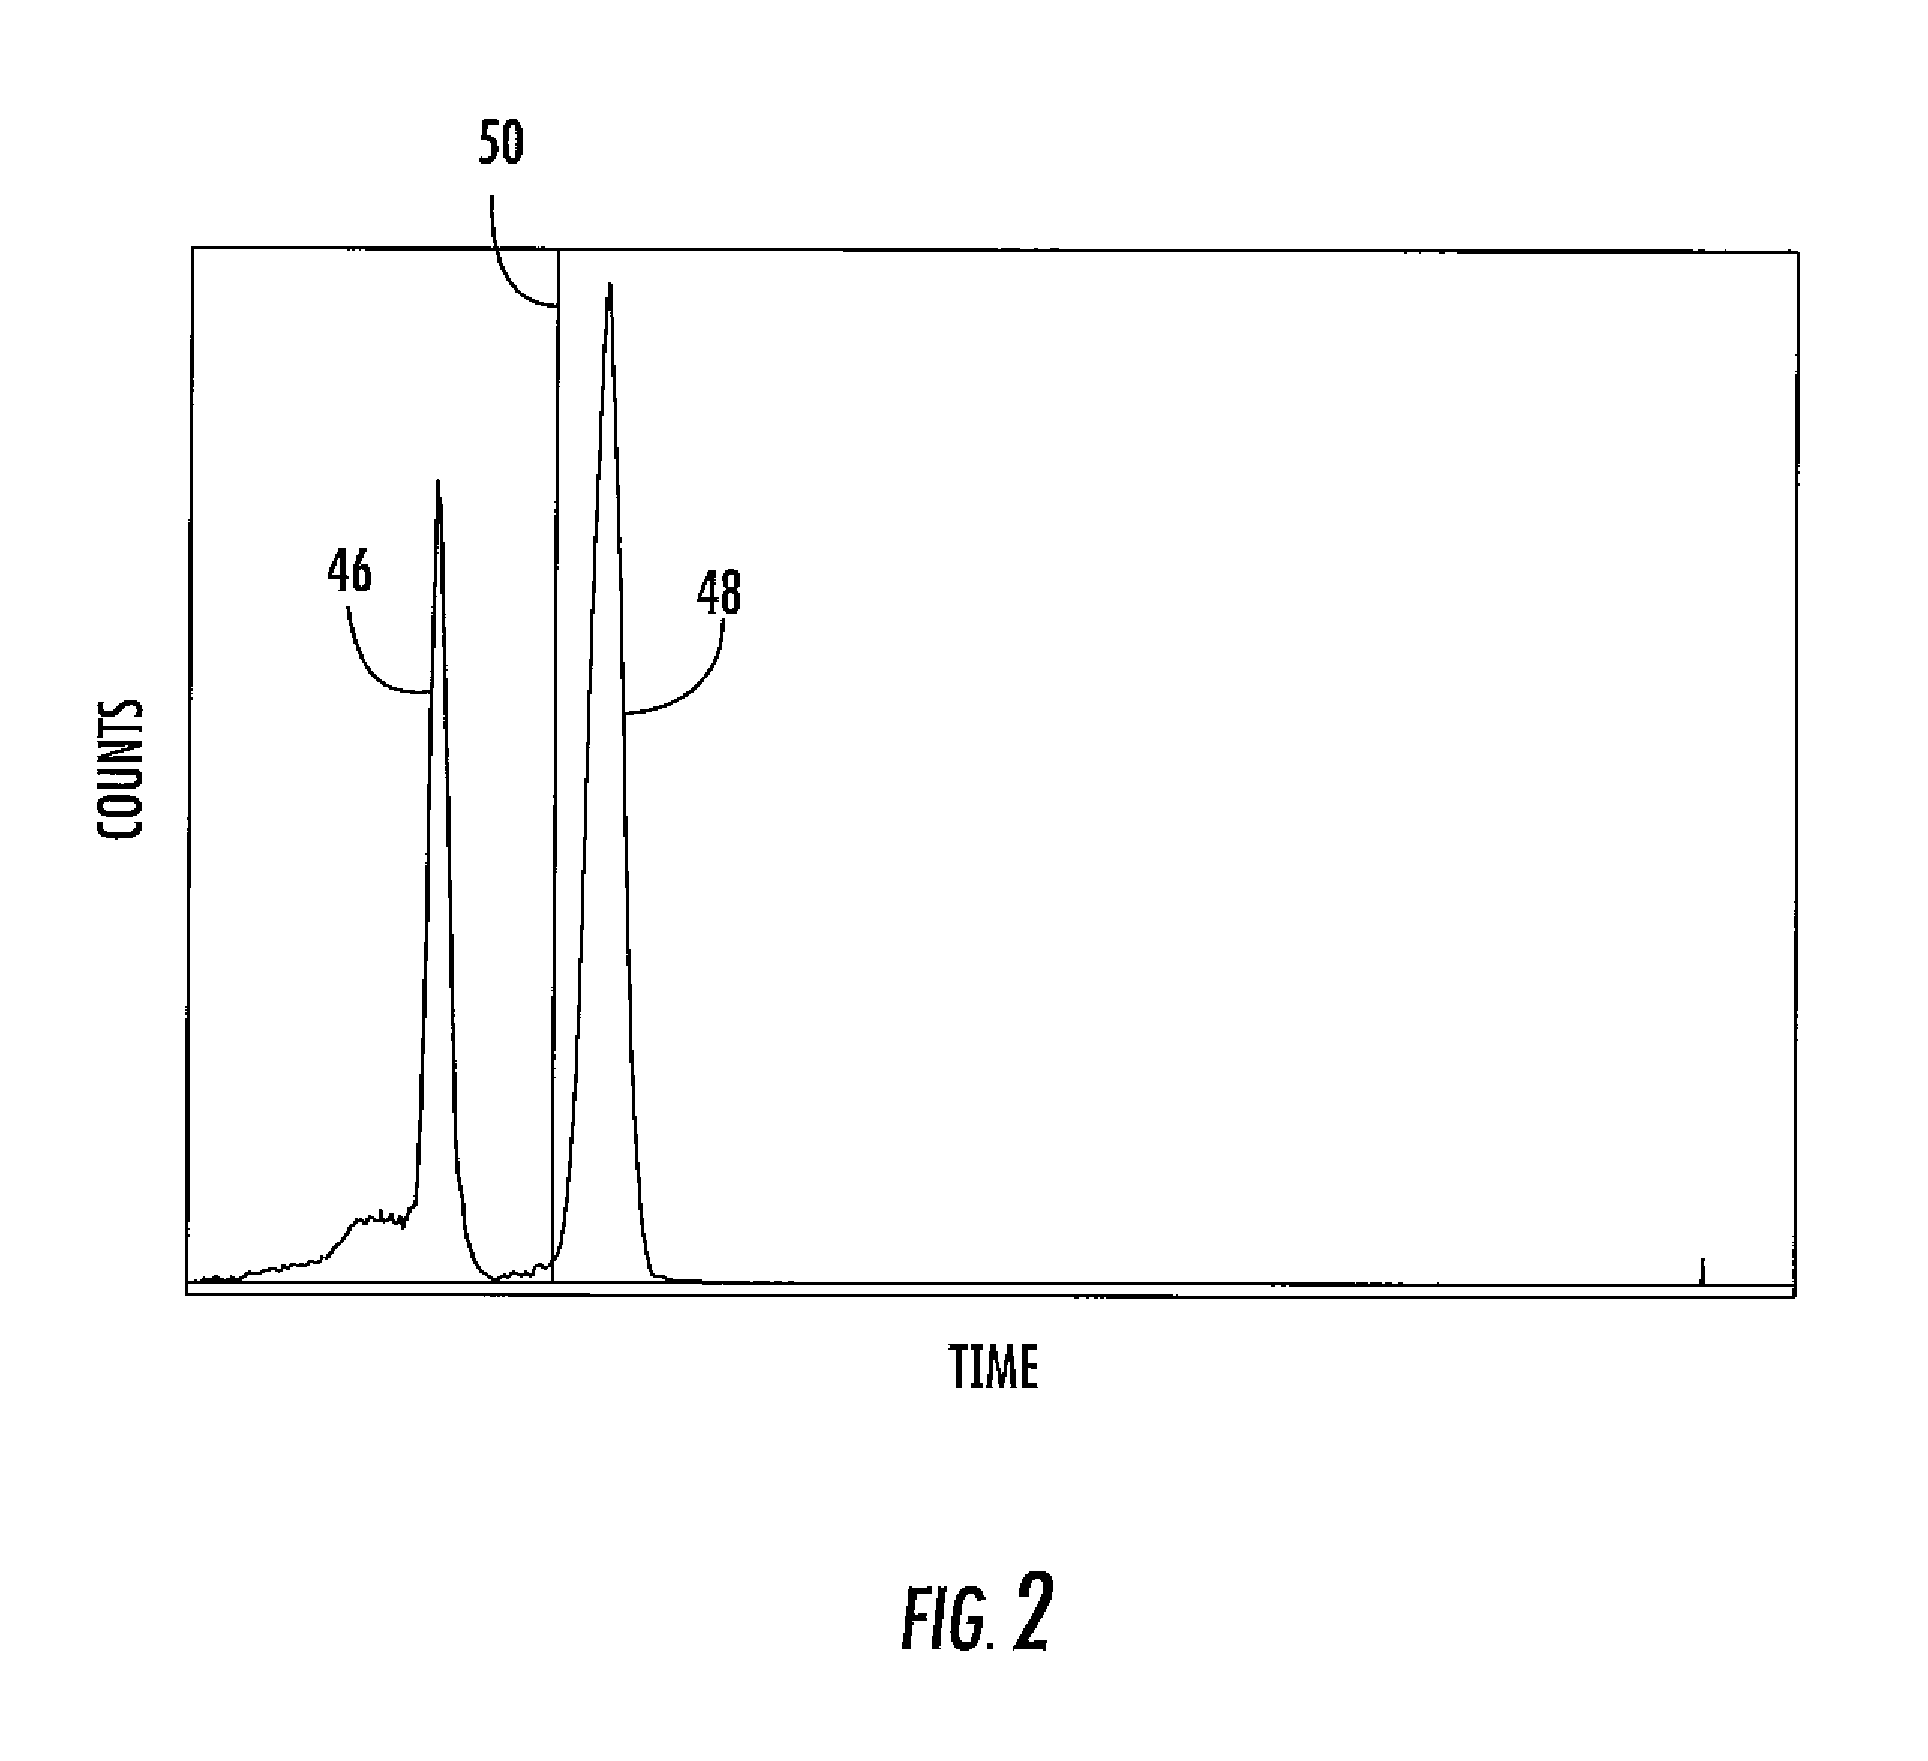 System and method for assaying a radionuclide